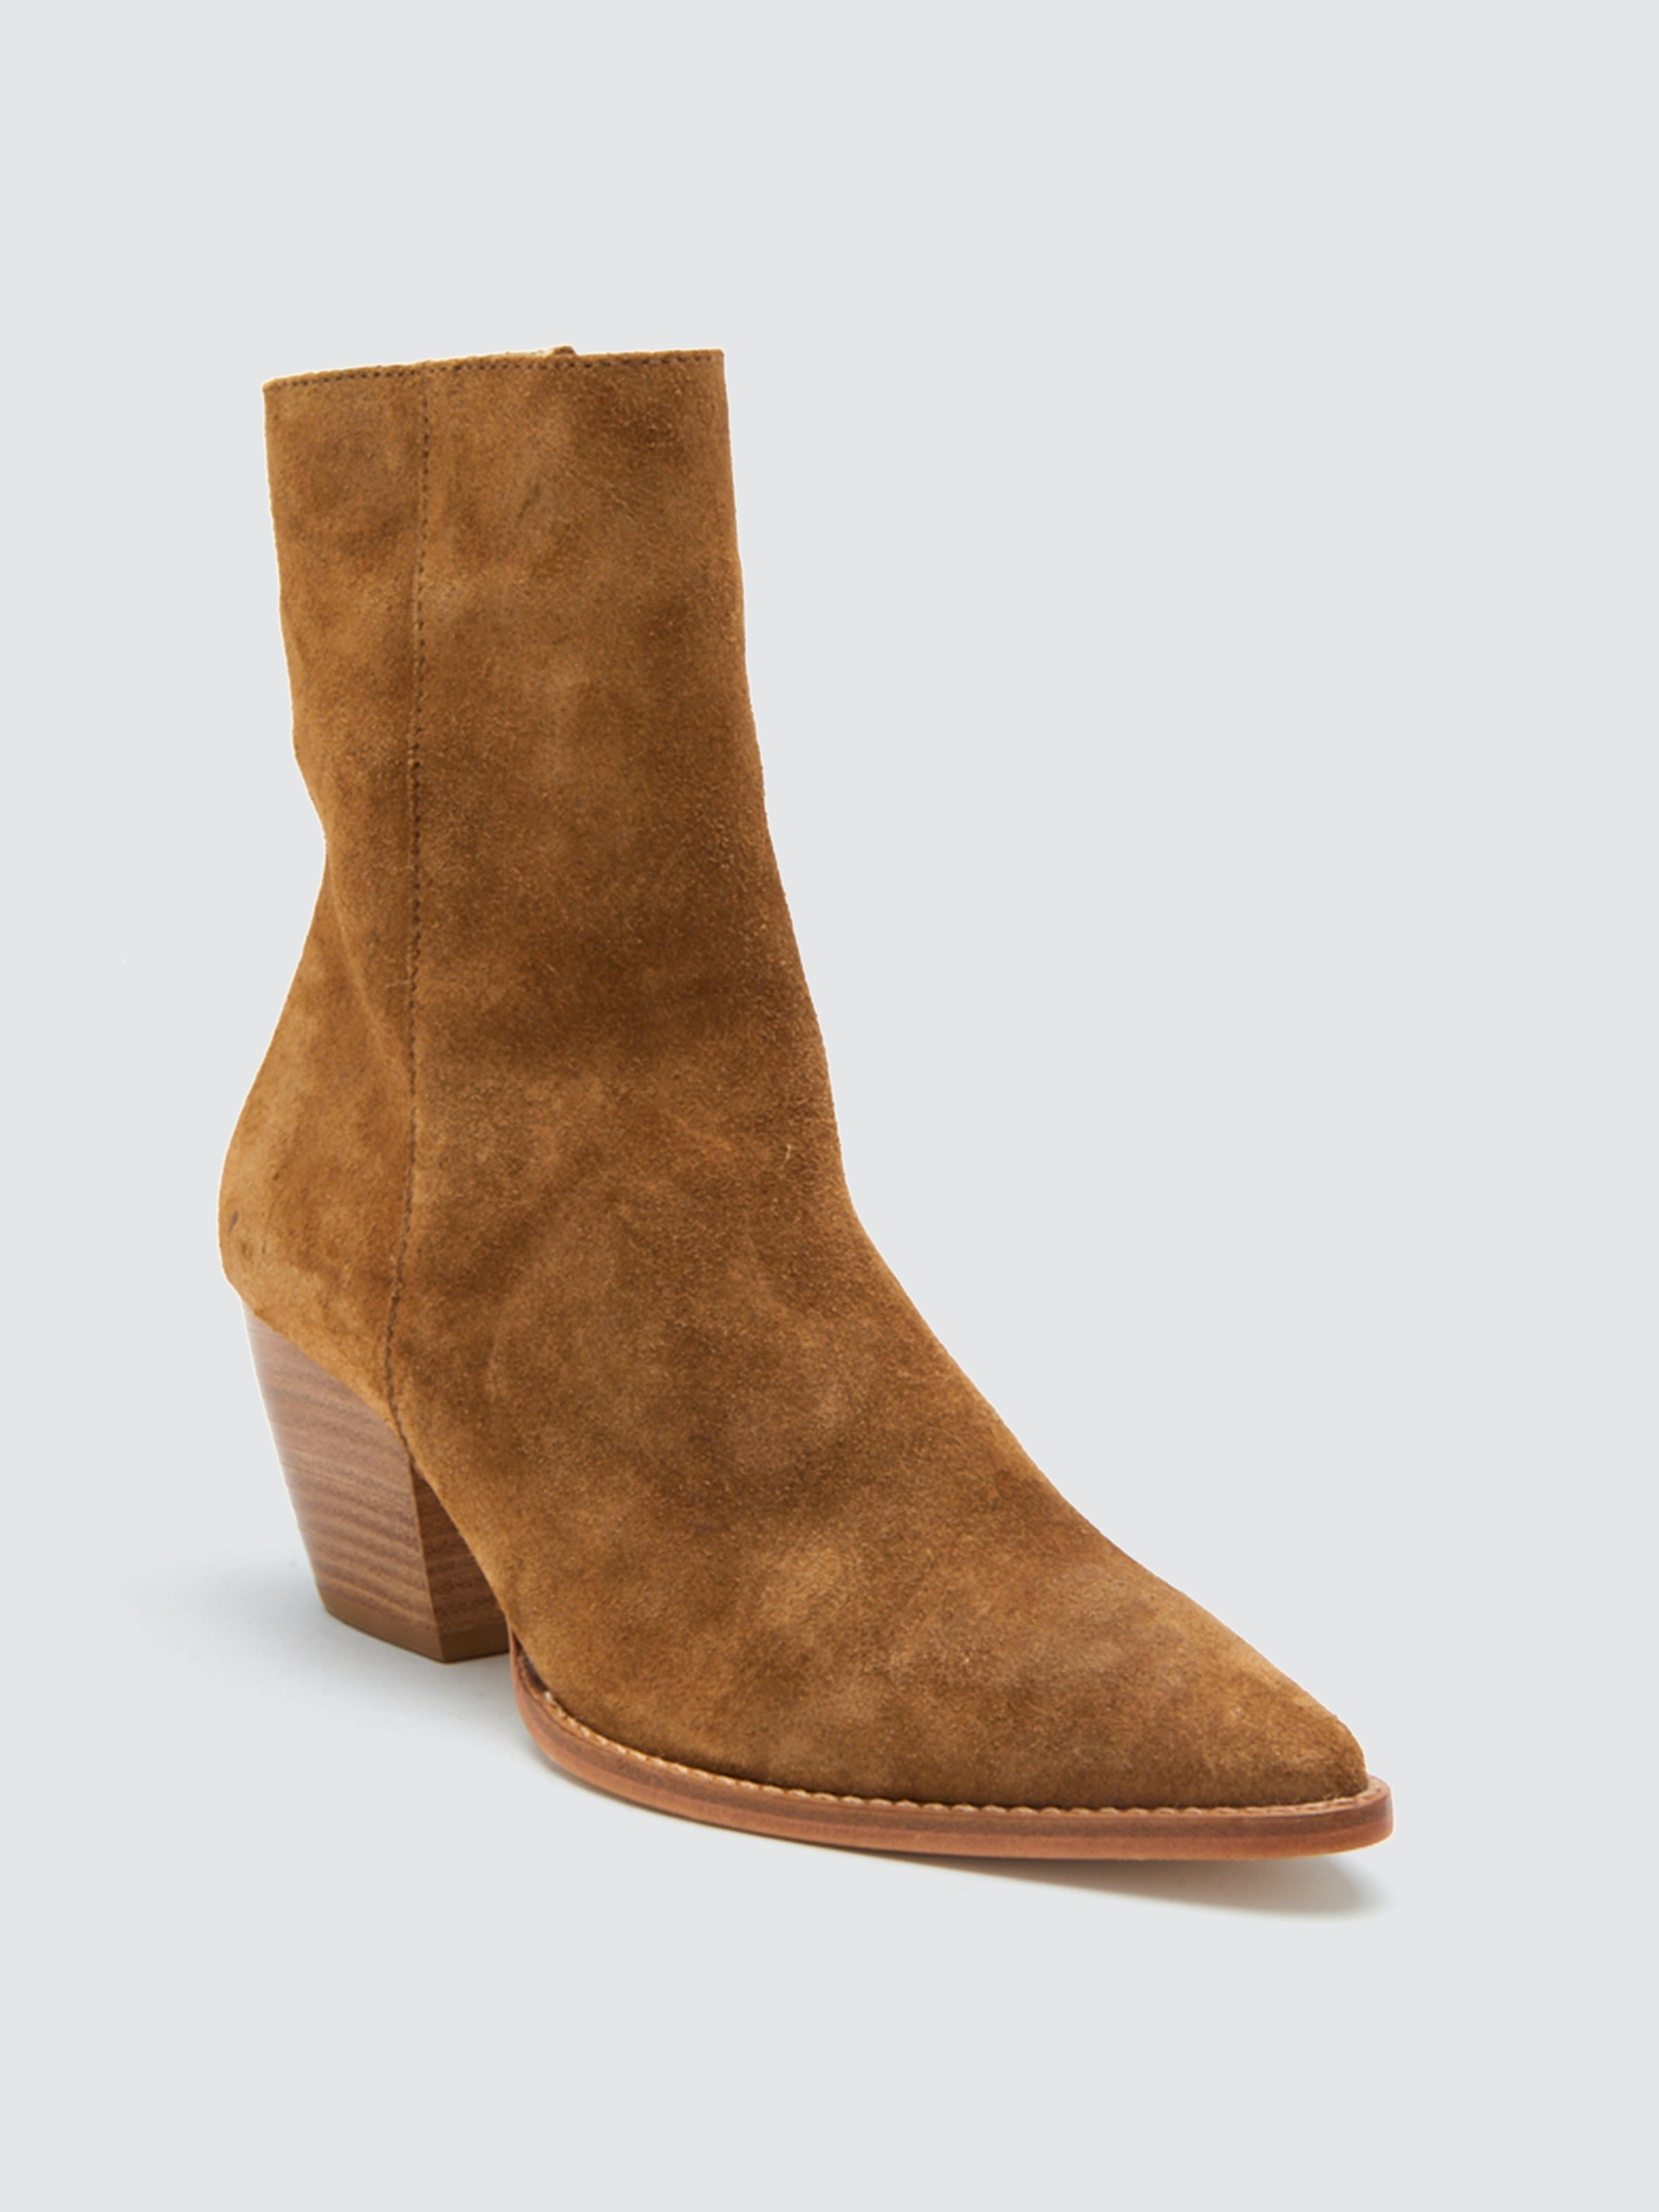 the suede boot in fawn